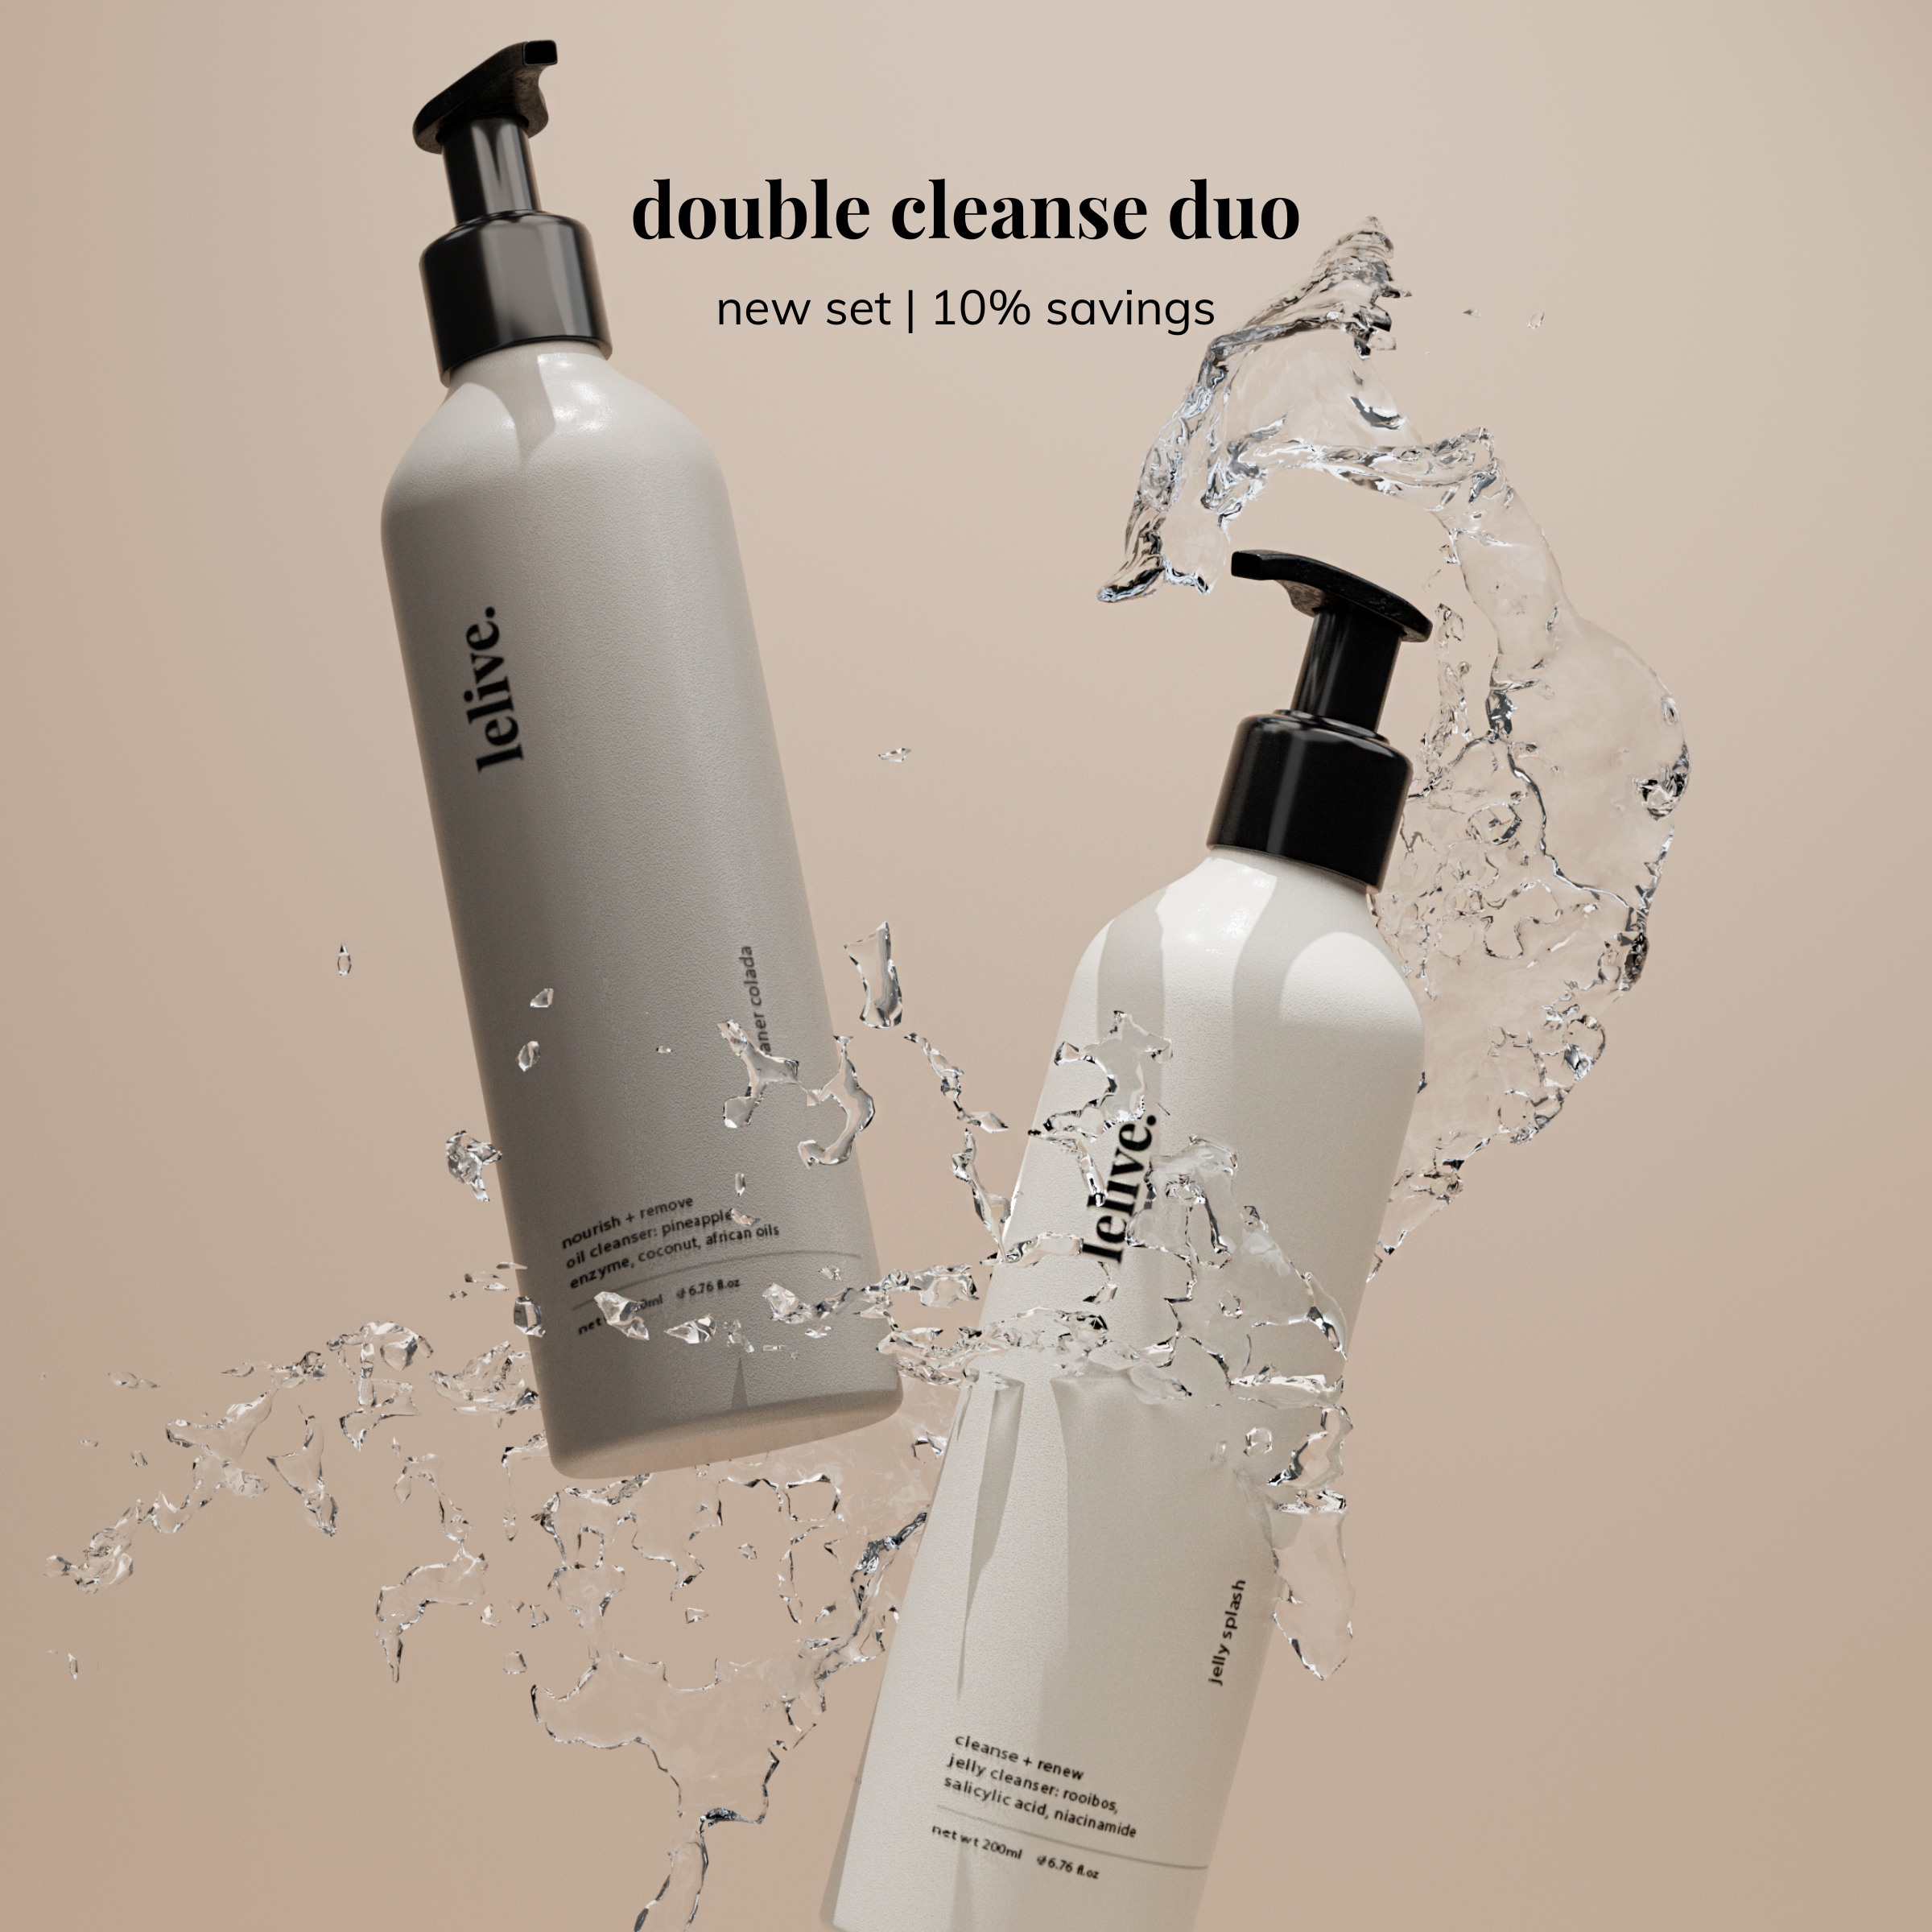 double cleanse duo | remove + clarify + renew